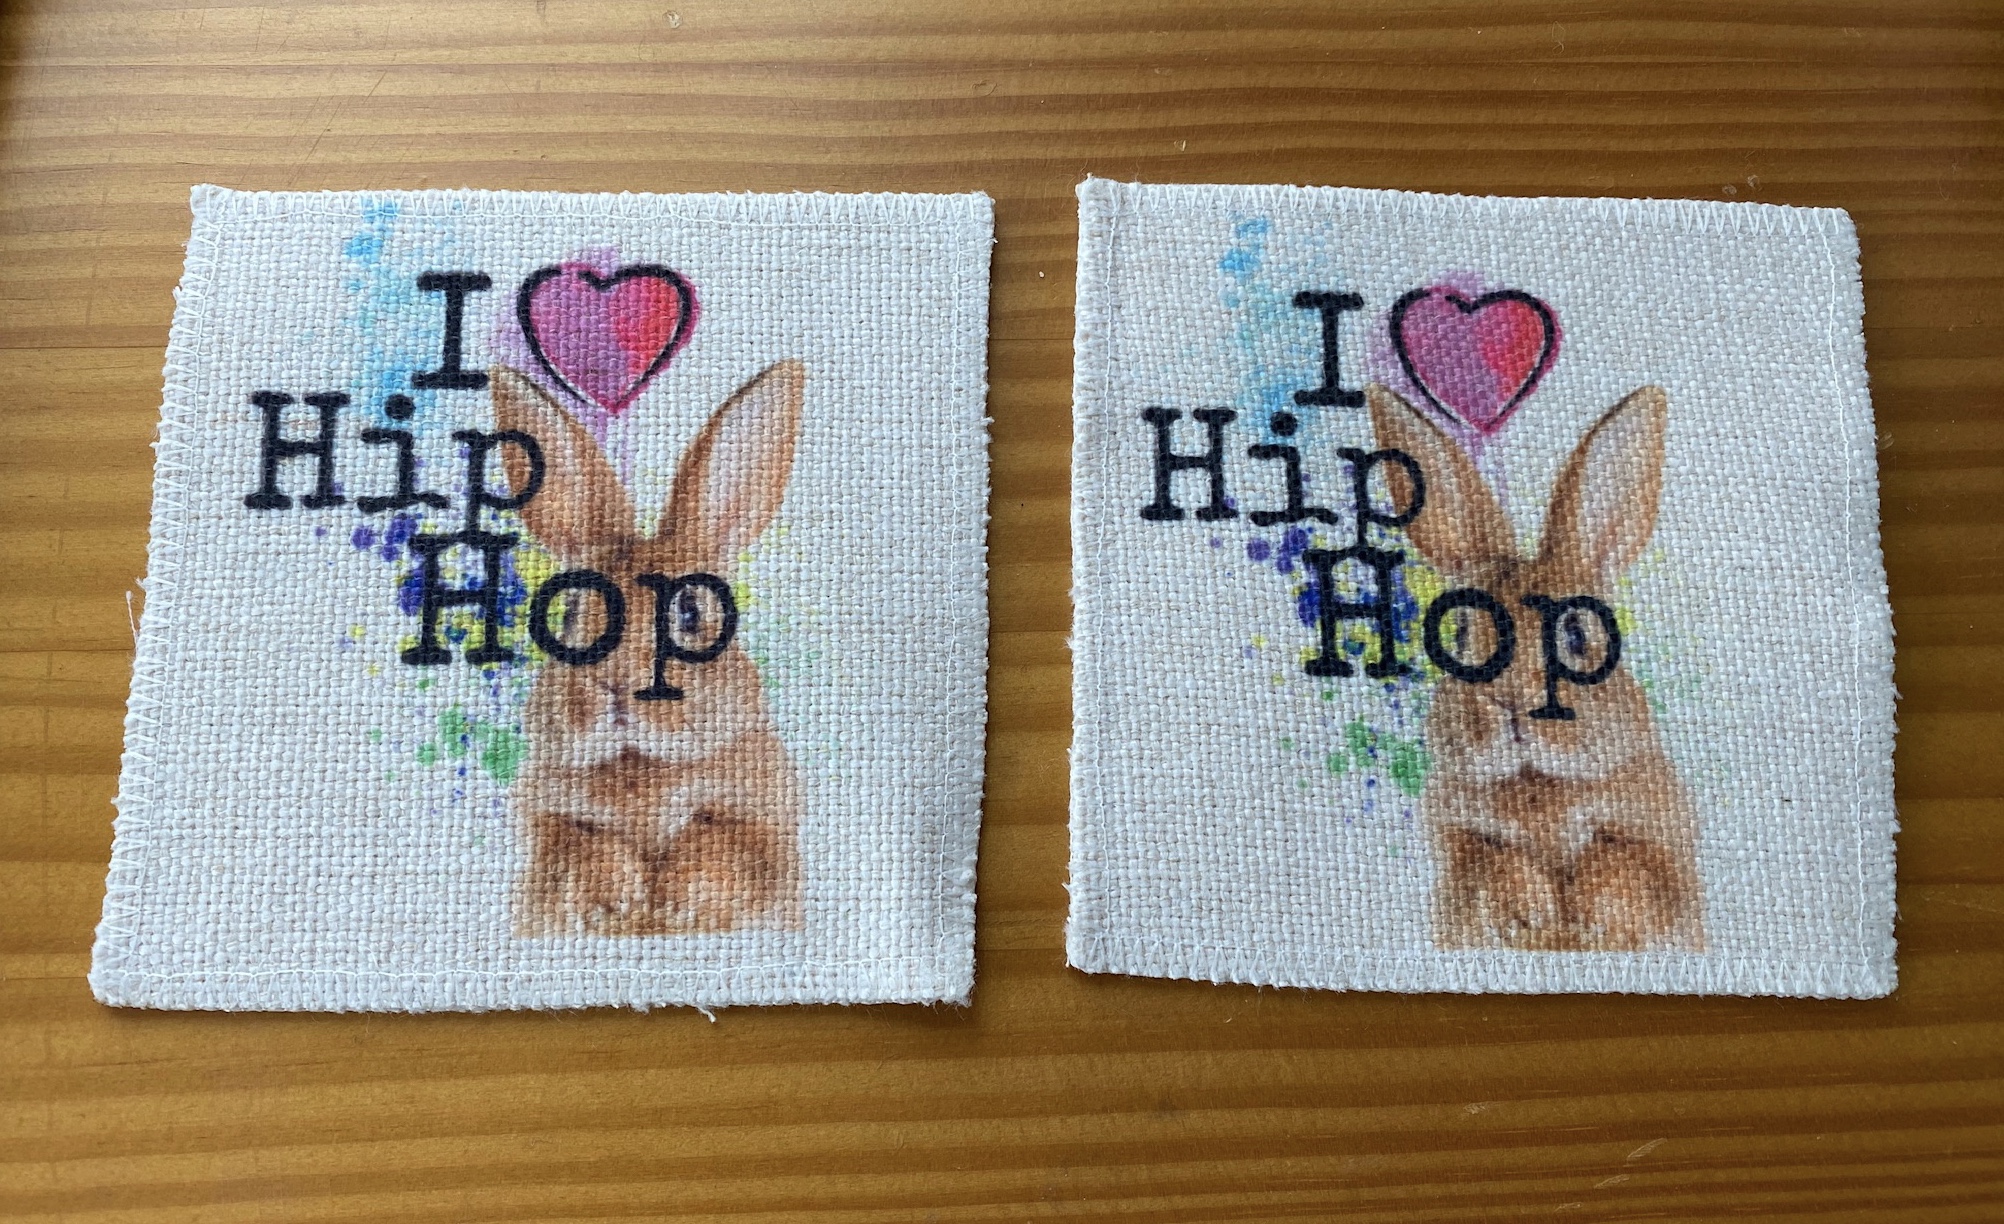 4 inch linen coasters
Used images from new Creative Studio software